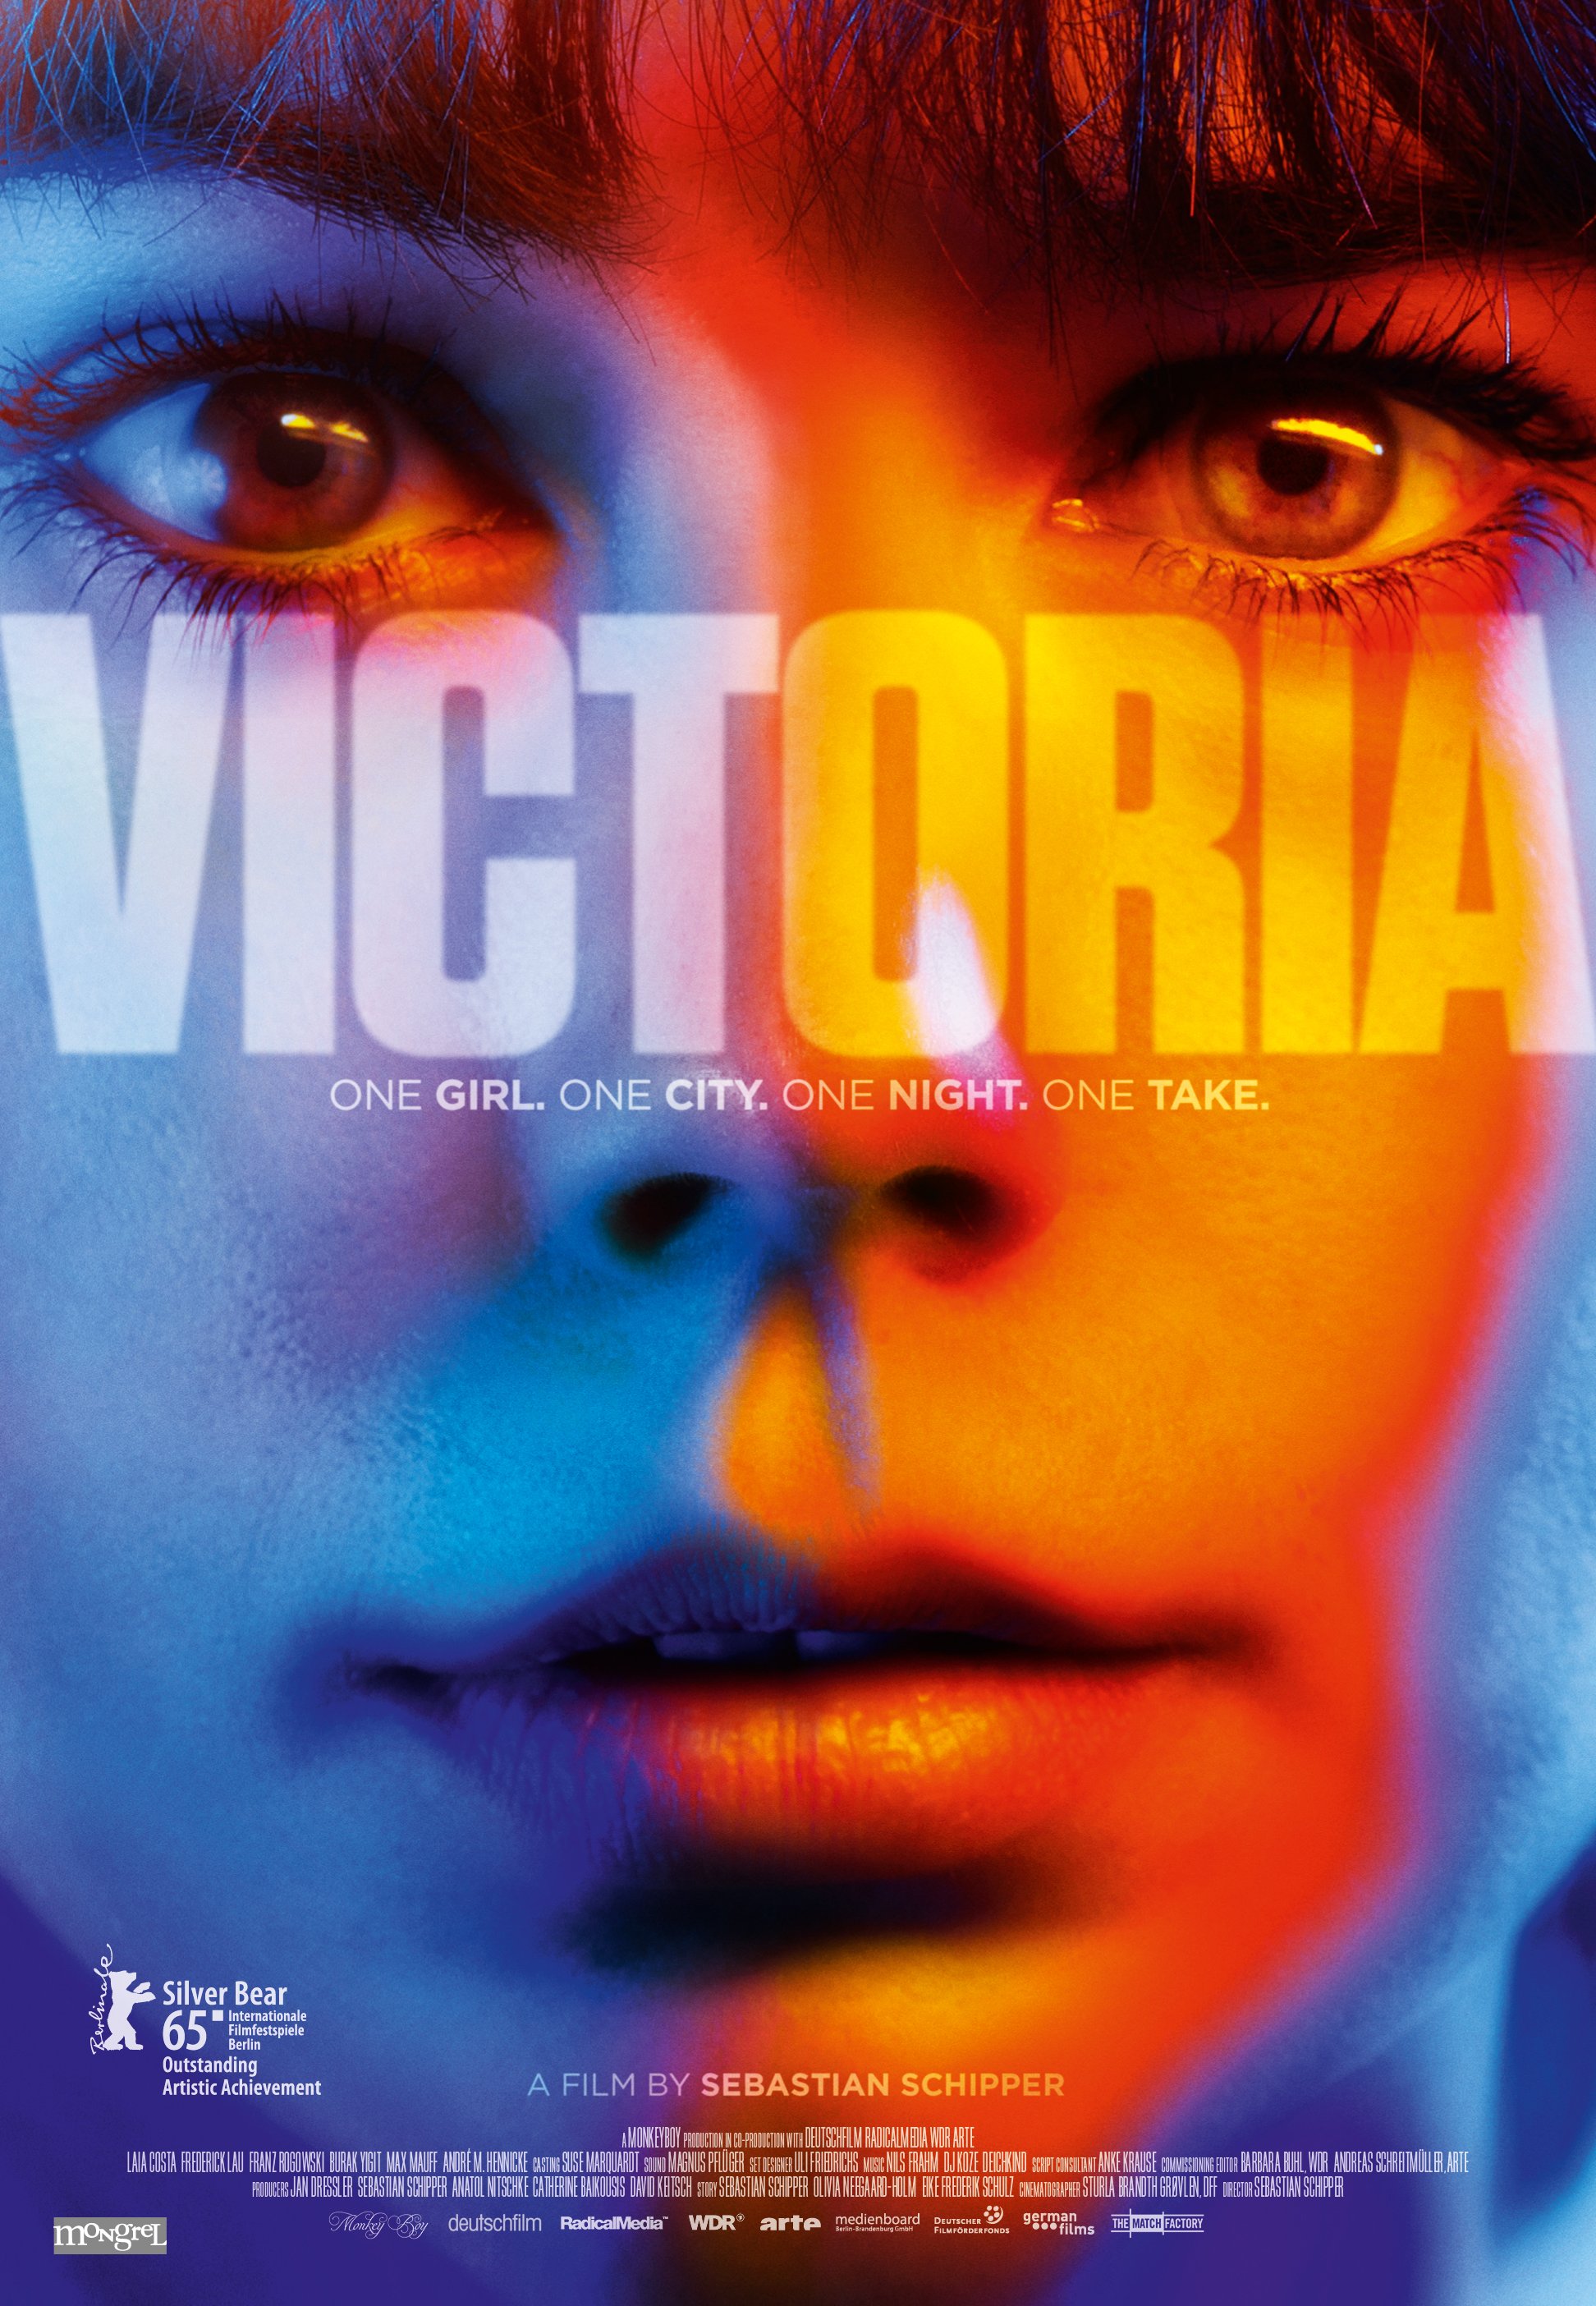 Poster of the movie Victoria